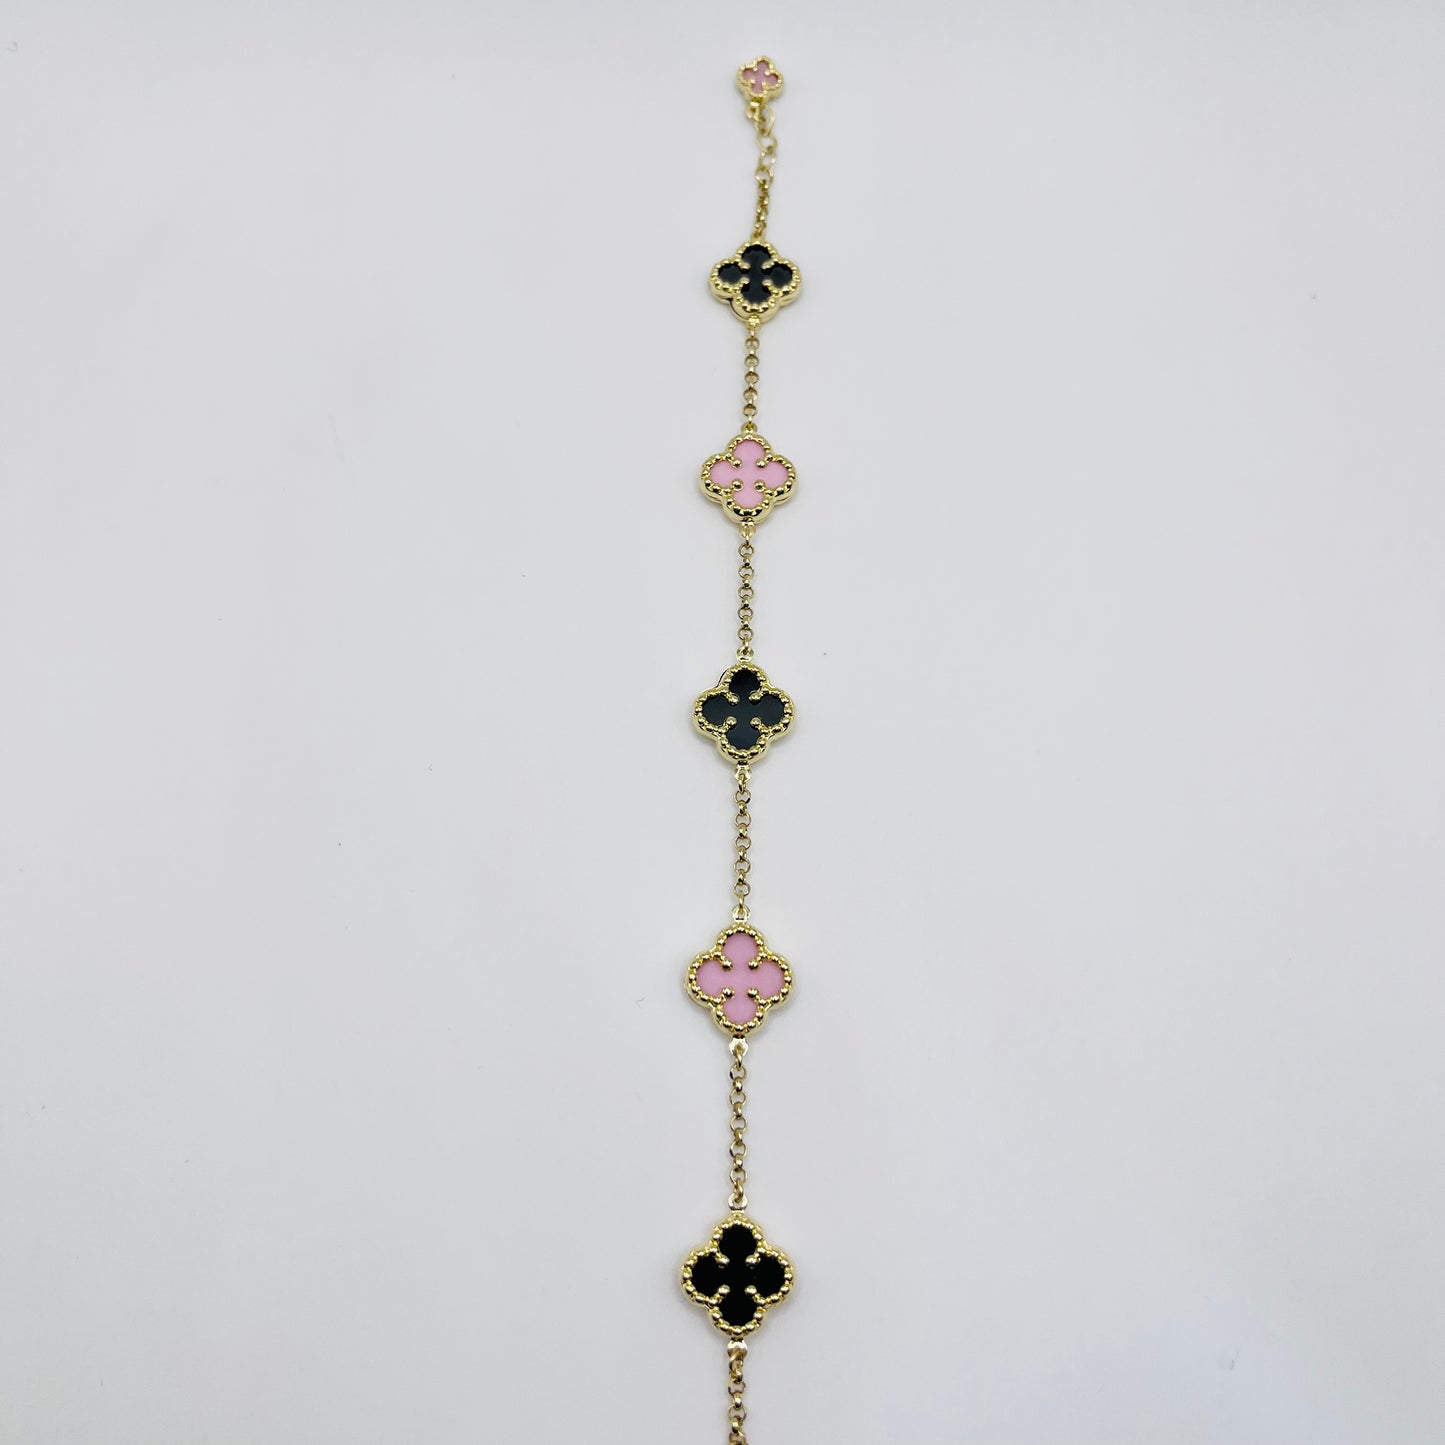 10K Gold Bracelet with  Pink and black Clovers (7")